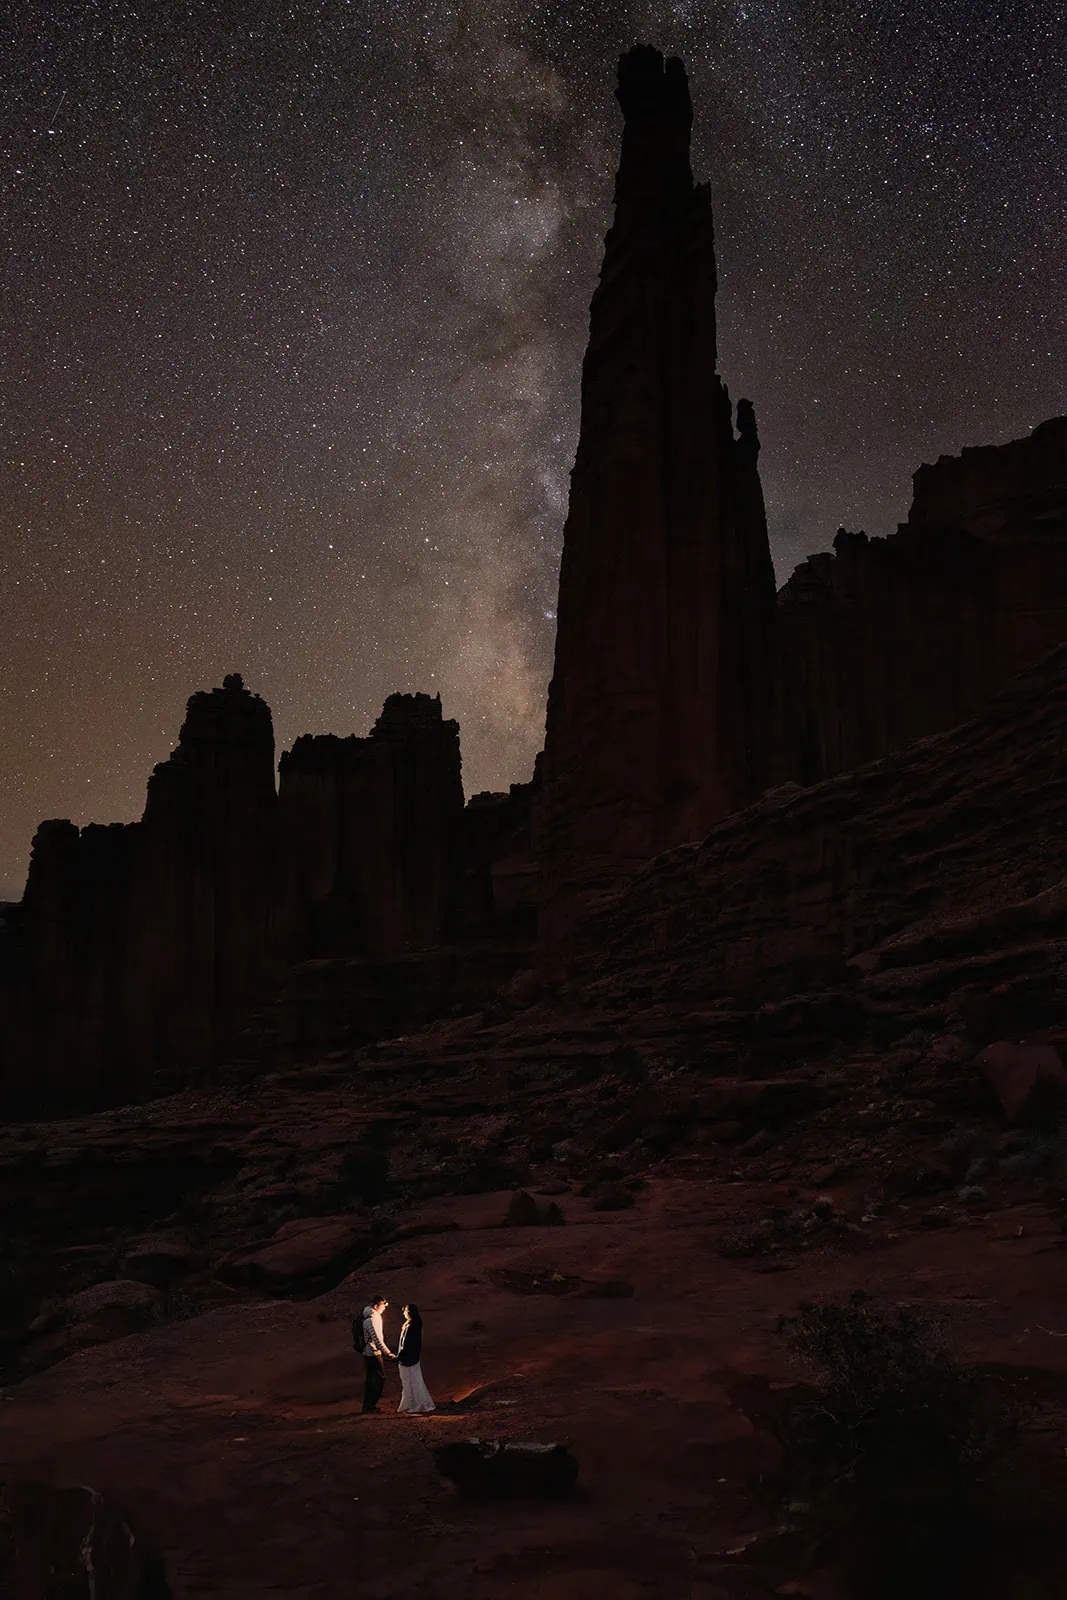 A couple stands together at night with the milky way in the sky at Fisher Towers